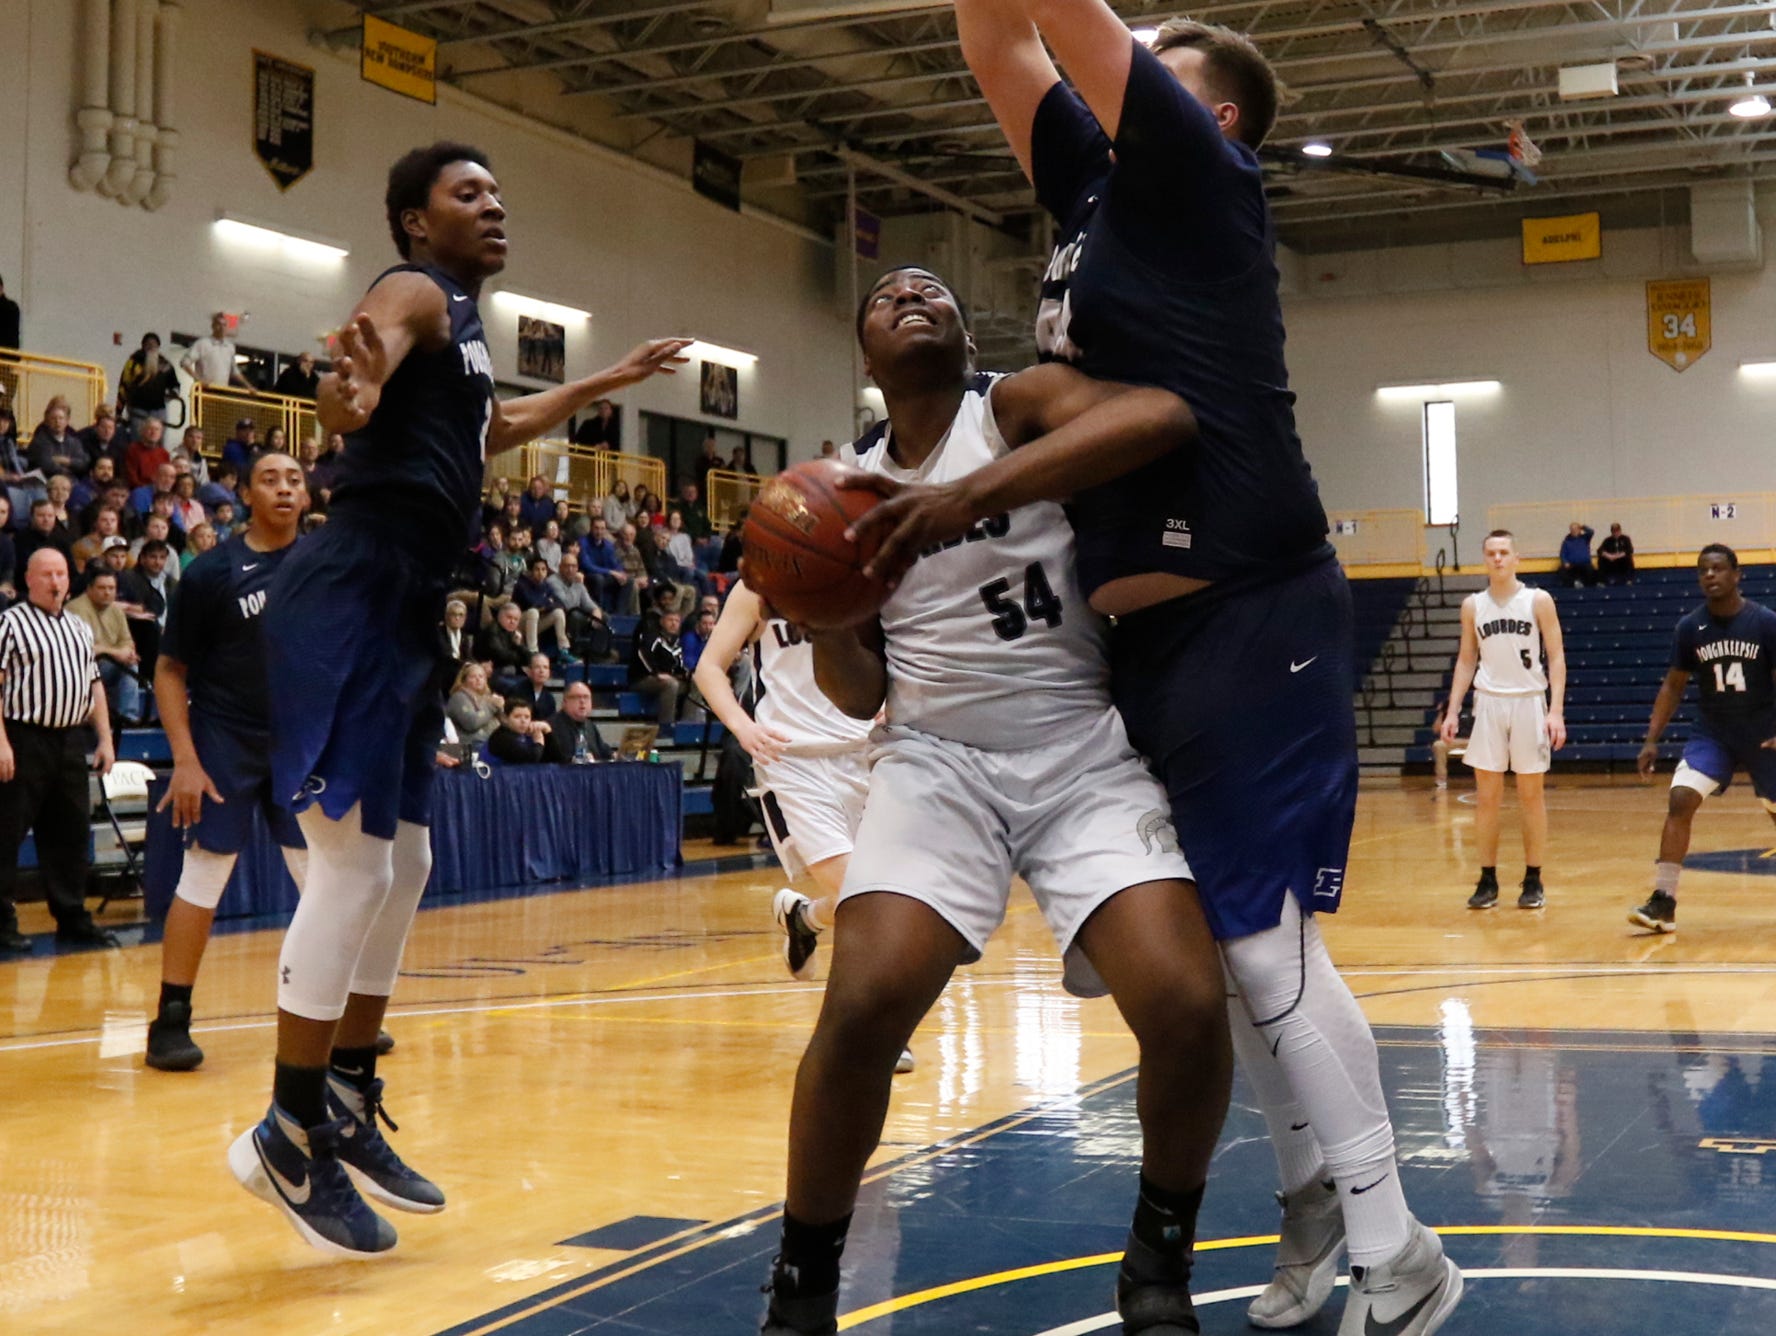 Our Lady of Lourdes High School's James Anozie looks for space as Poughkeepsie's Cory Simmons defends during the Class A regional finals at Pace University in Pleasantville on March 11.